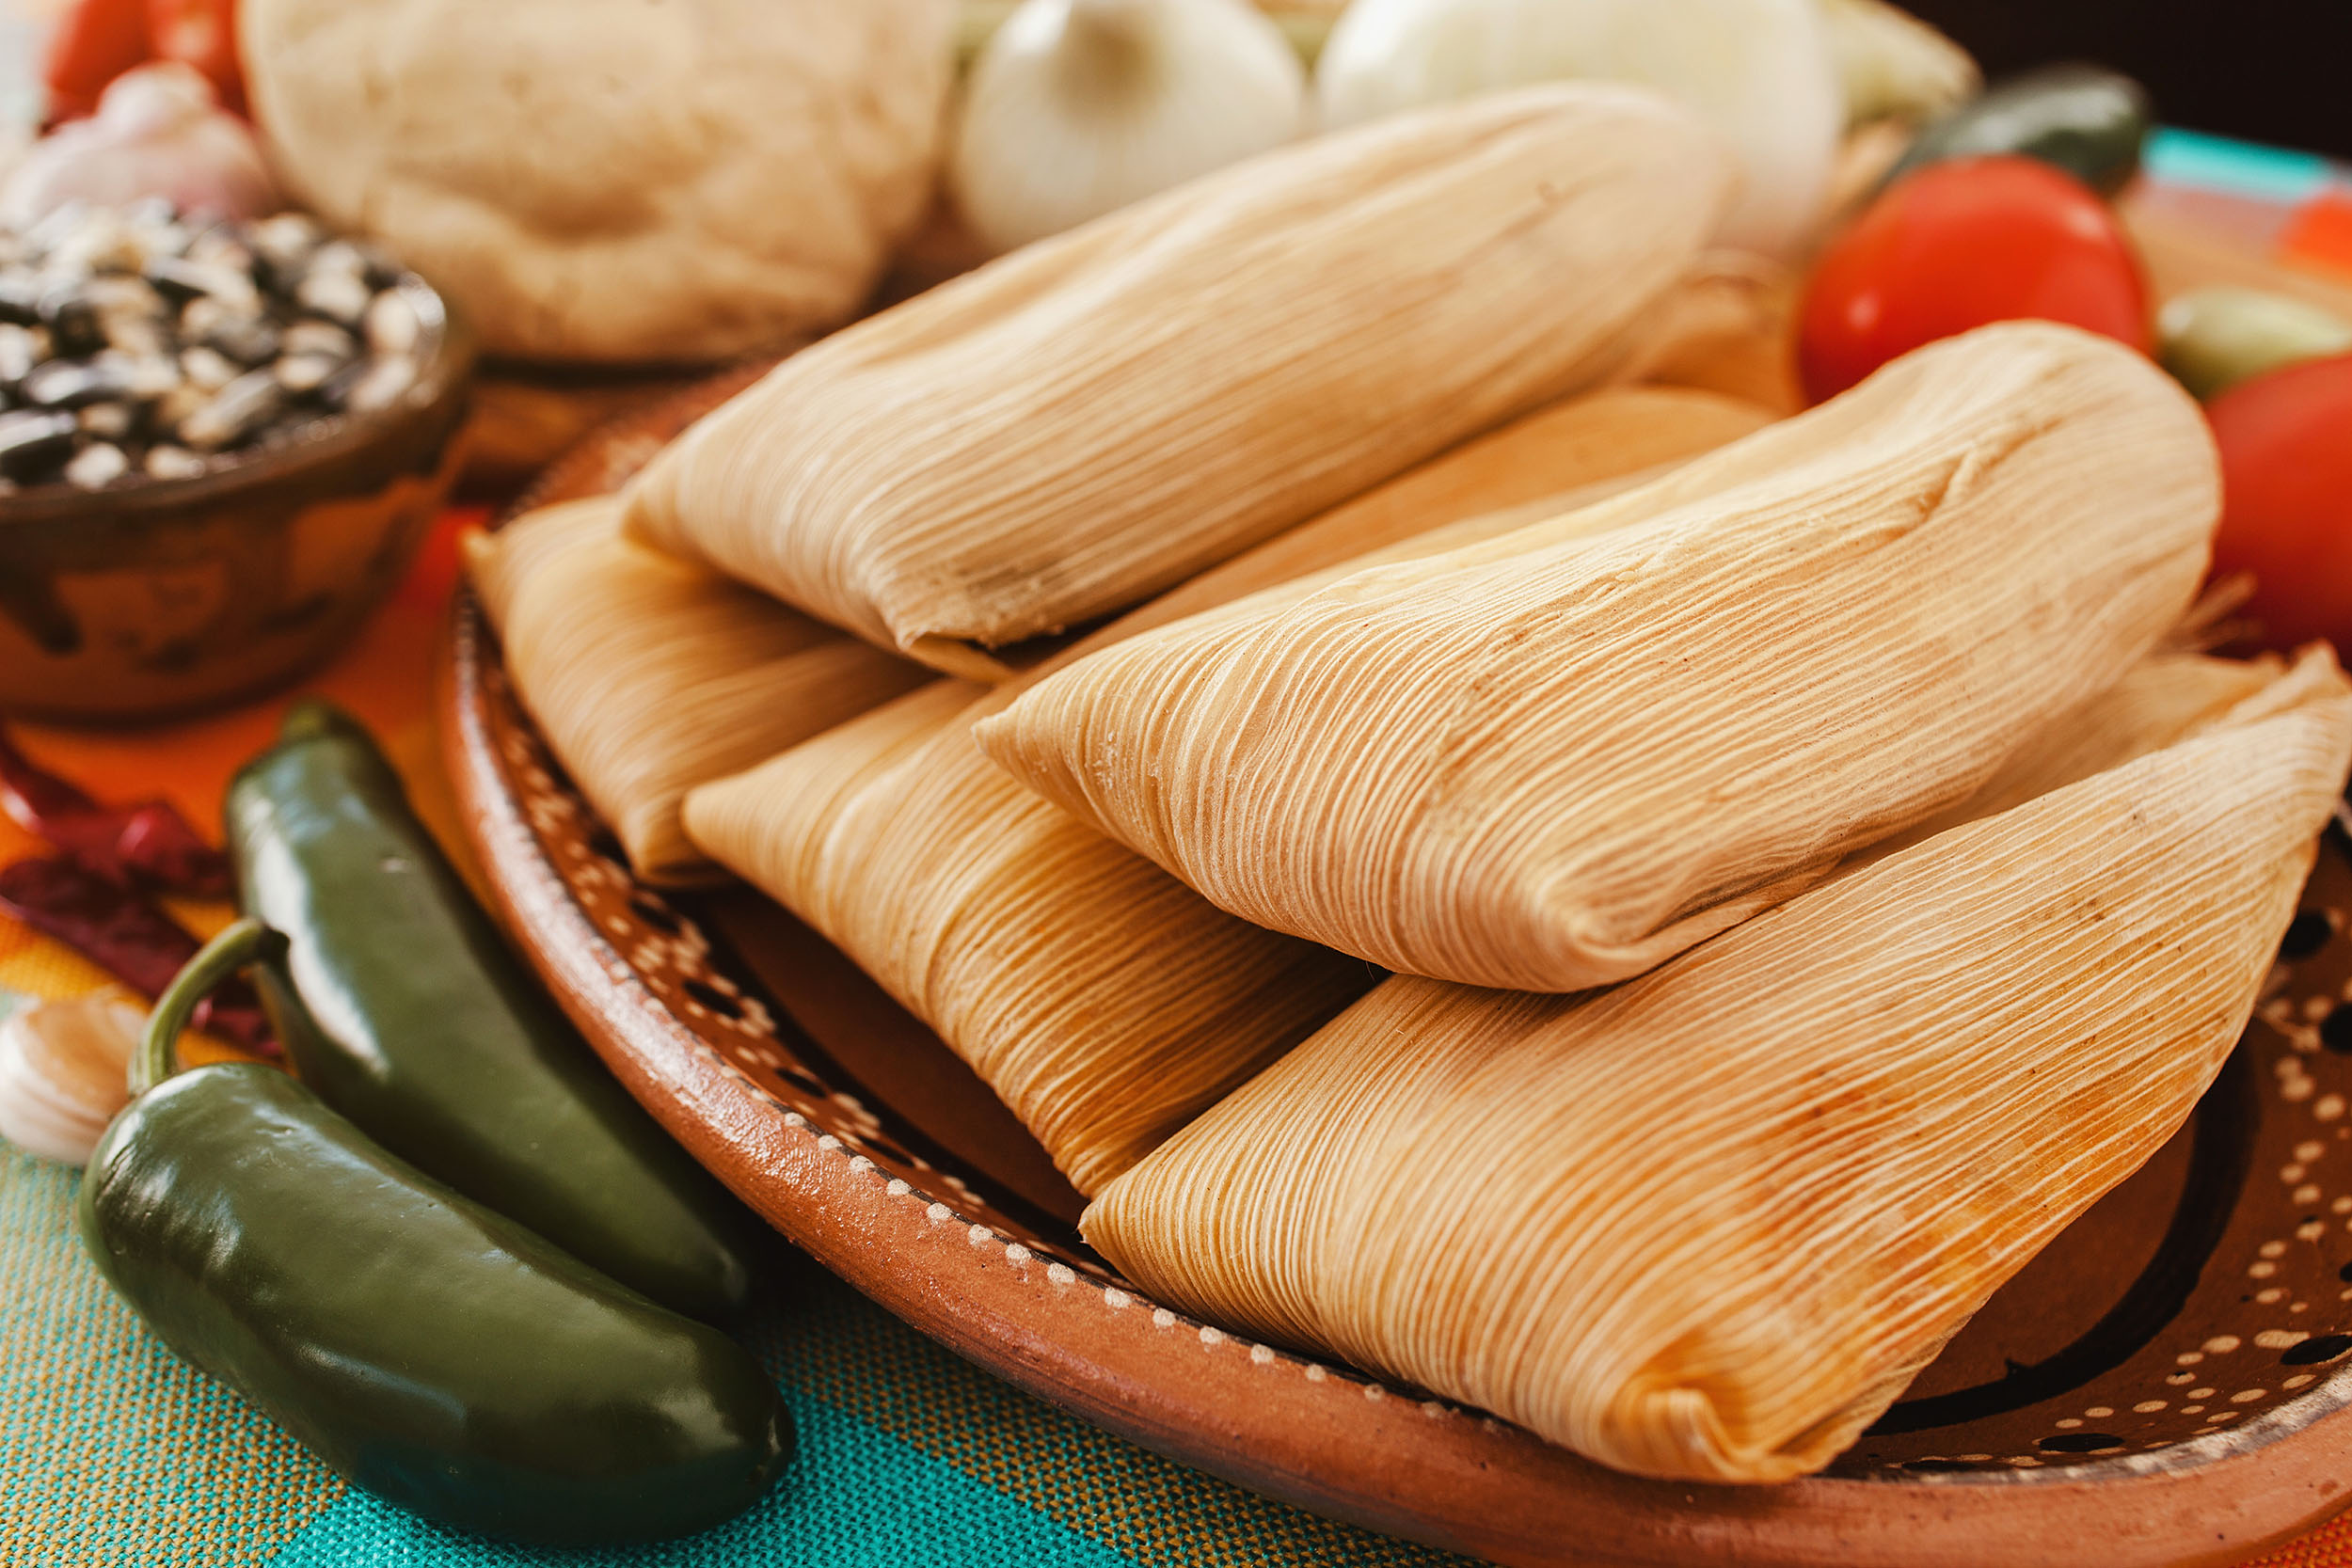 https://www.themanual.com/wp-content/uploads/sites/9/2021/02/how-to-reheat-tamales-in-different-ways.jpg?p=1